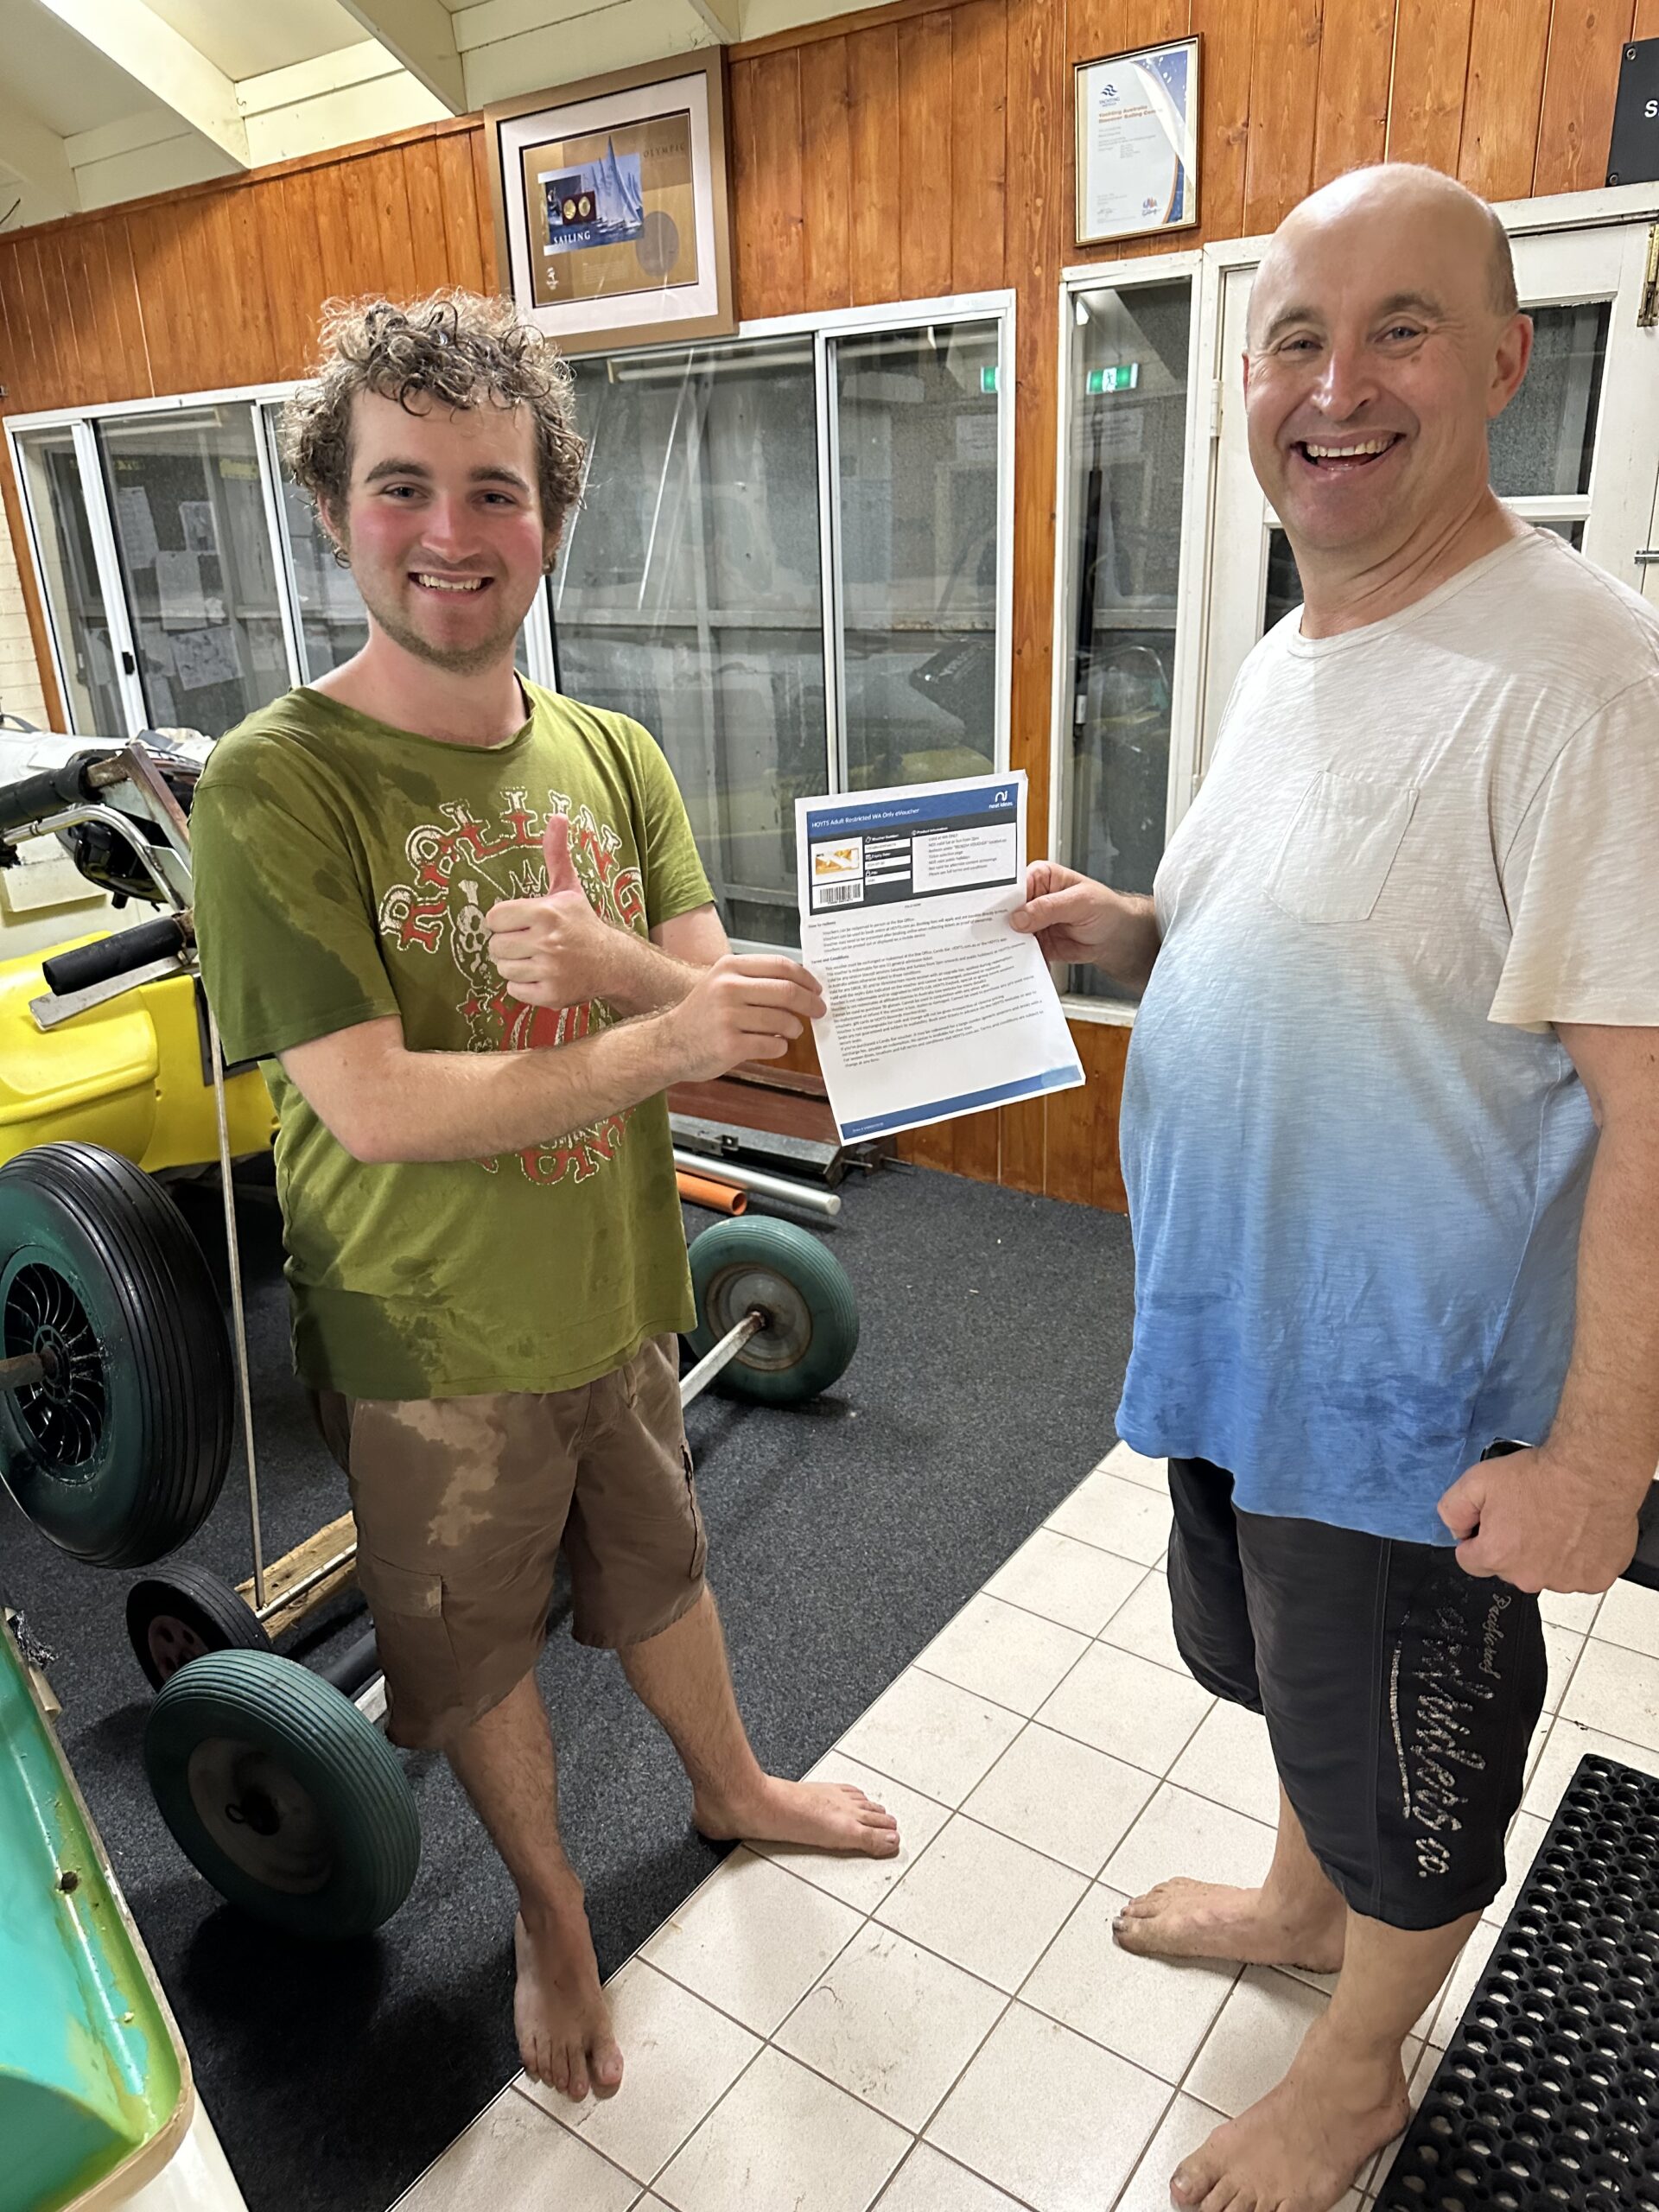 Tuesday 25th July 2023 : Tonight’s photo shows club member Adam Galanty presenting Mike Galanty with a movie voucher.